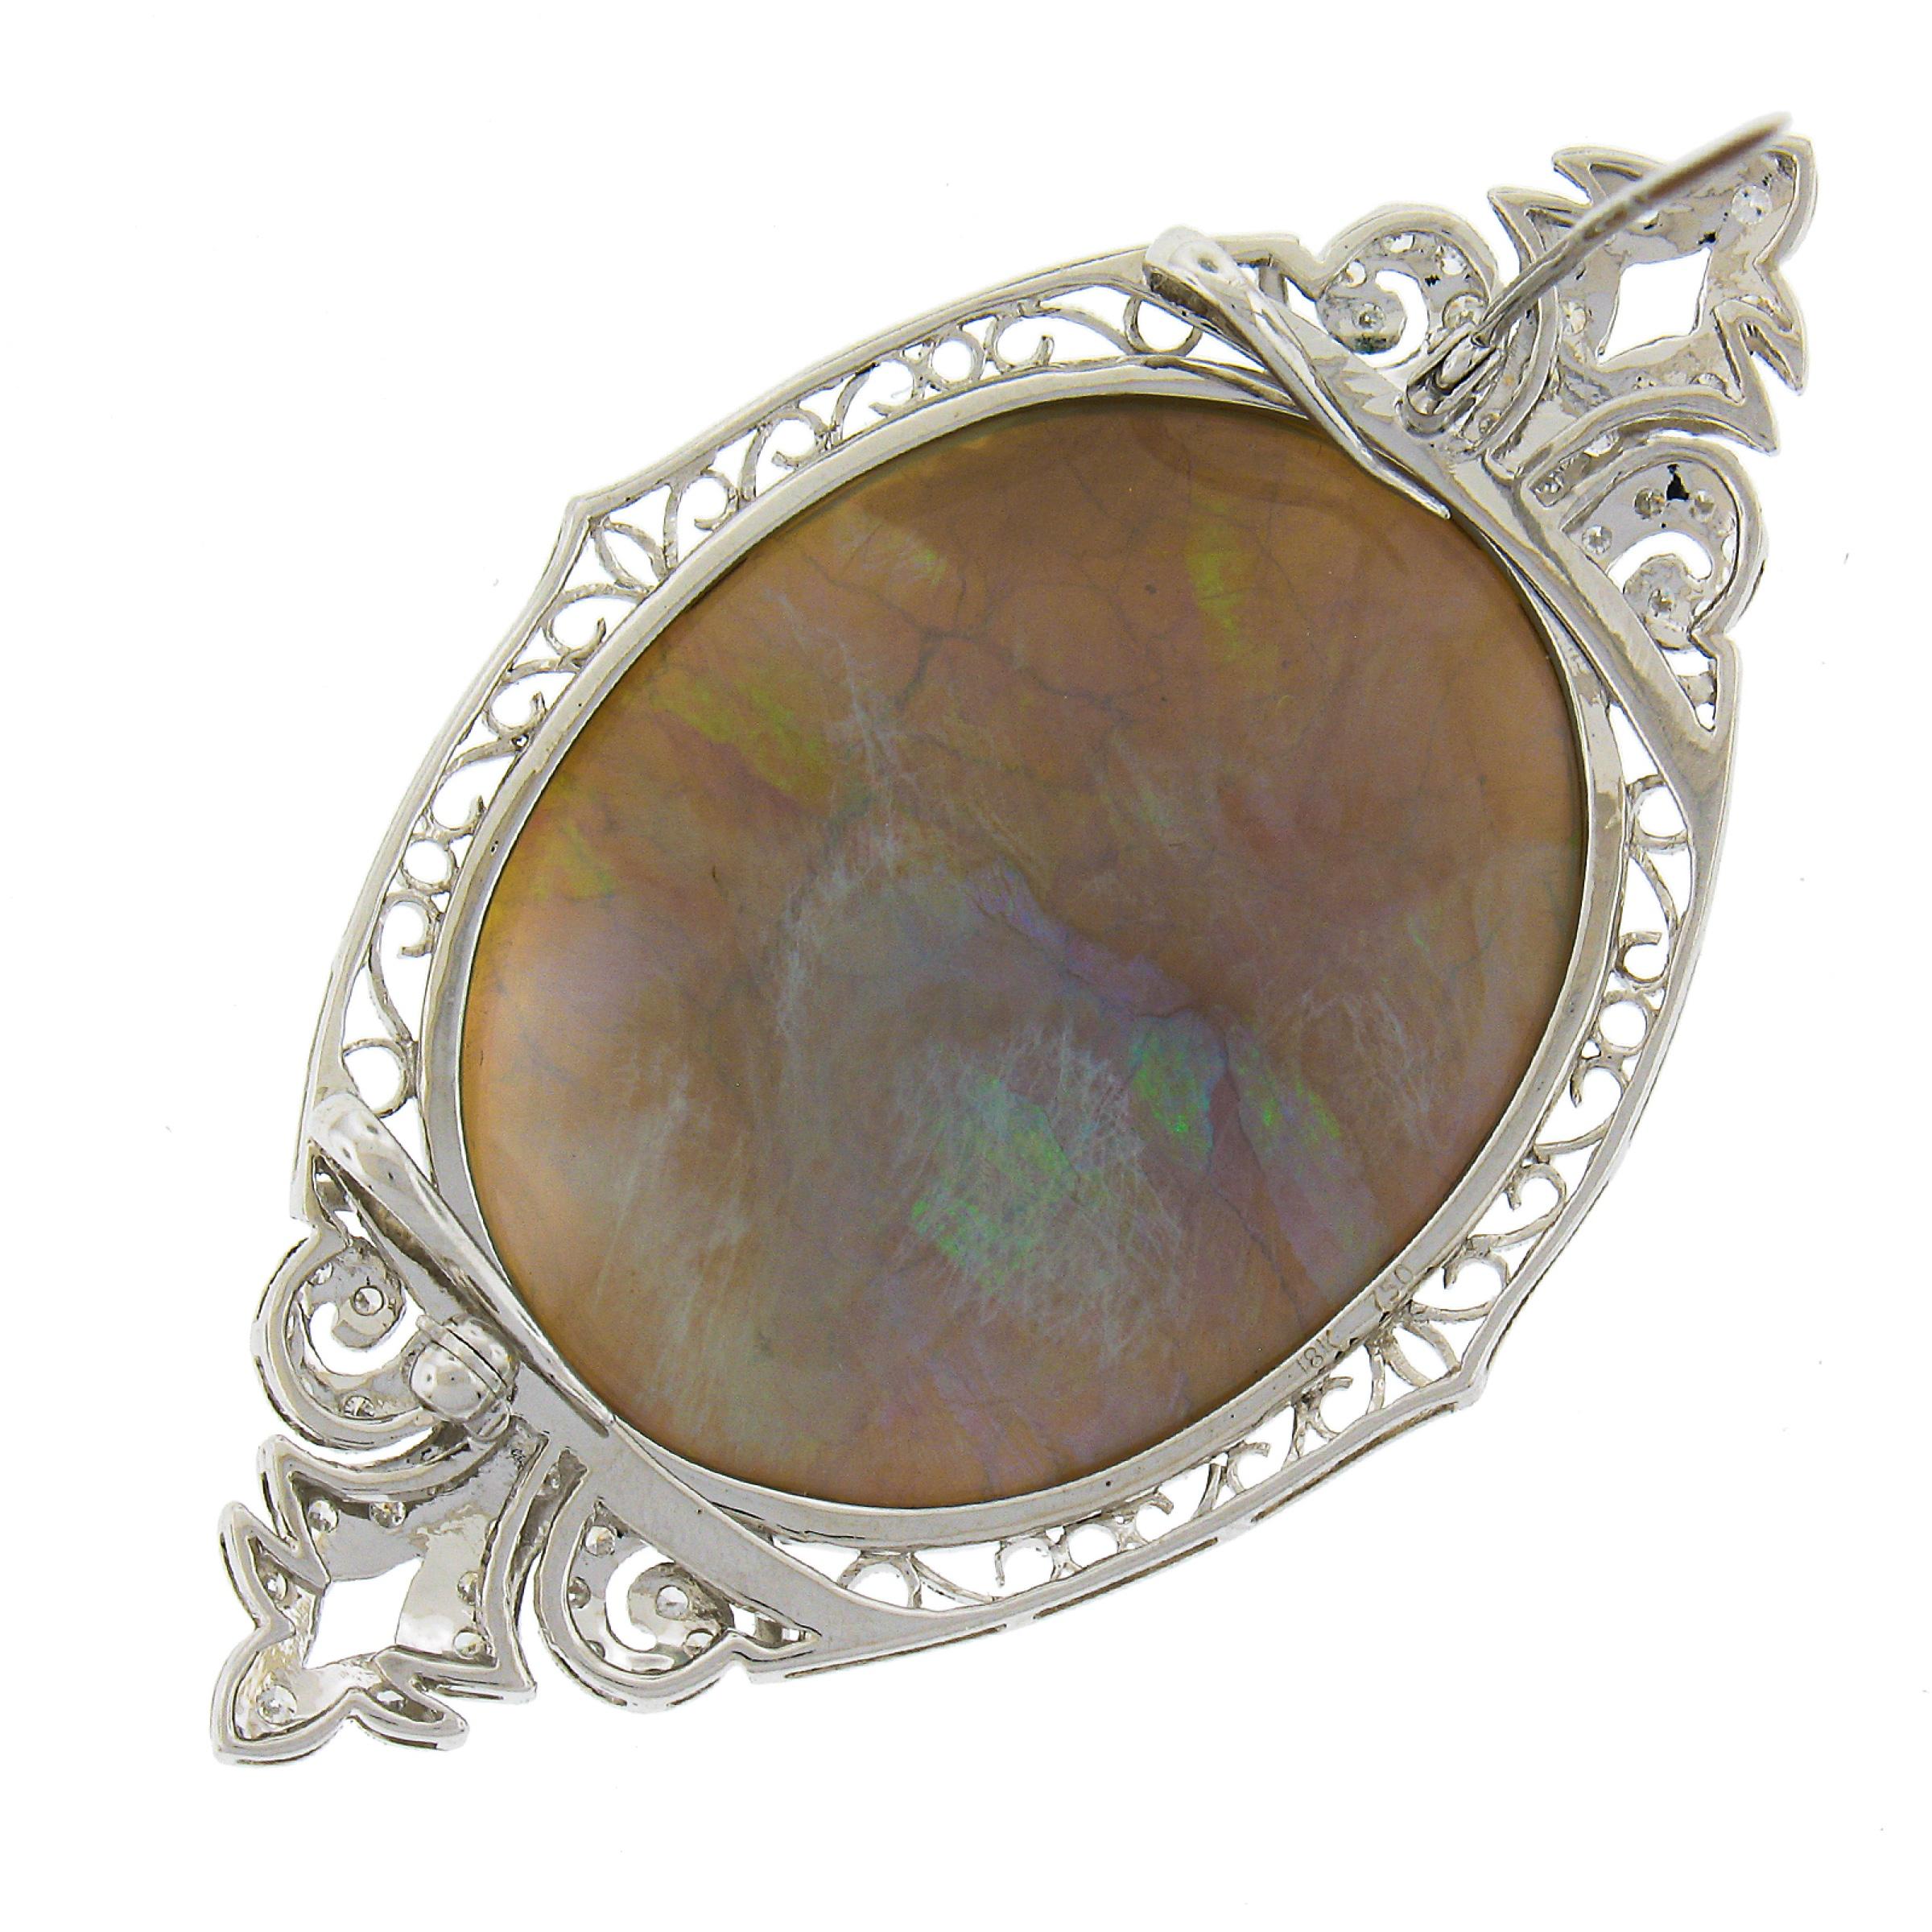 Vintage 18k Gold 61.40ctw GIA Oval Cabochon Opal & Diamond Pin Brooch Pendant In Excellent Condition For Sale In Montclair, NJ